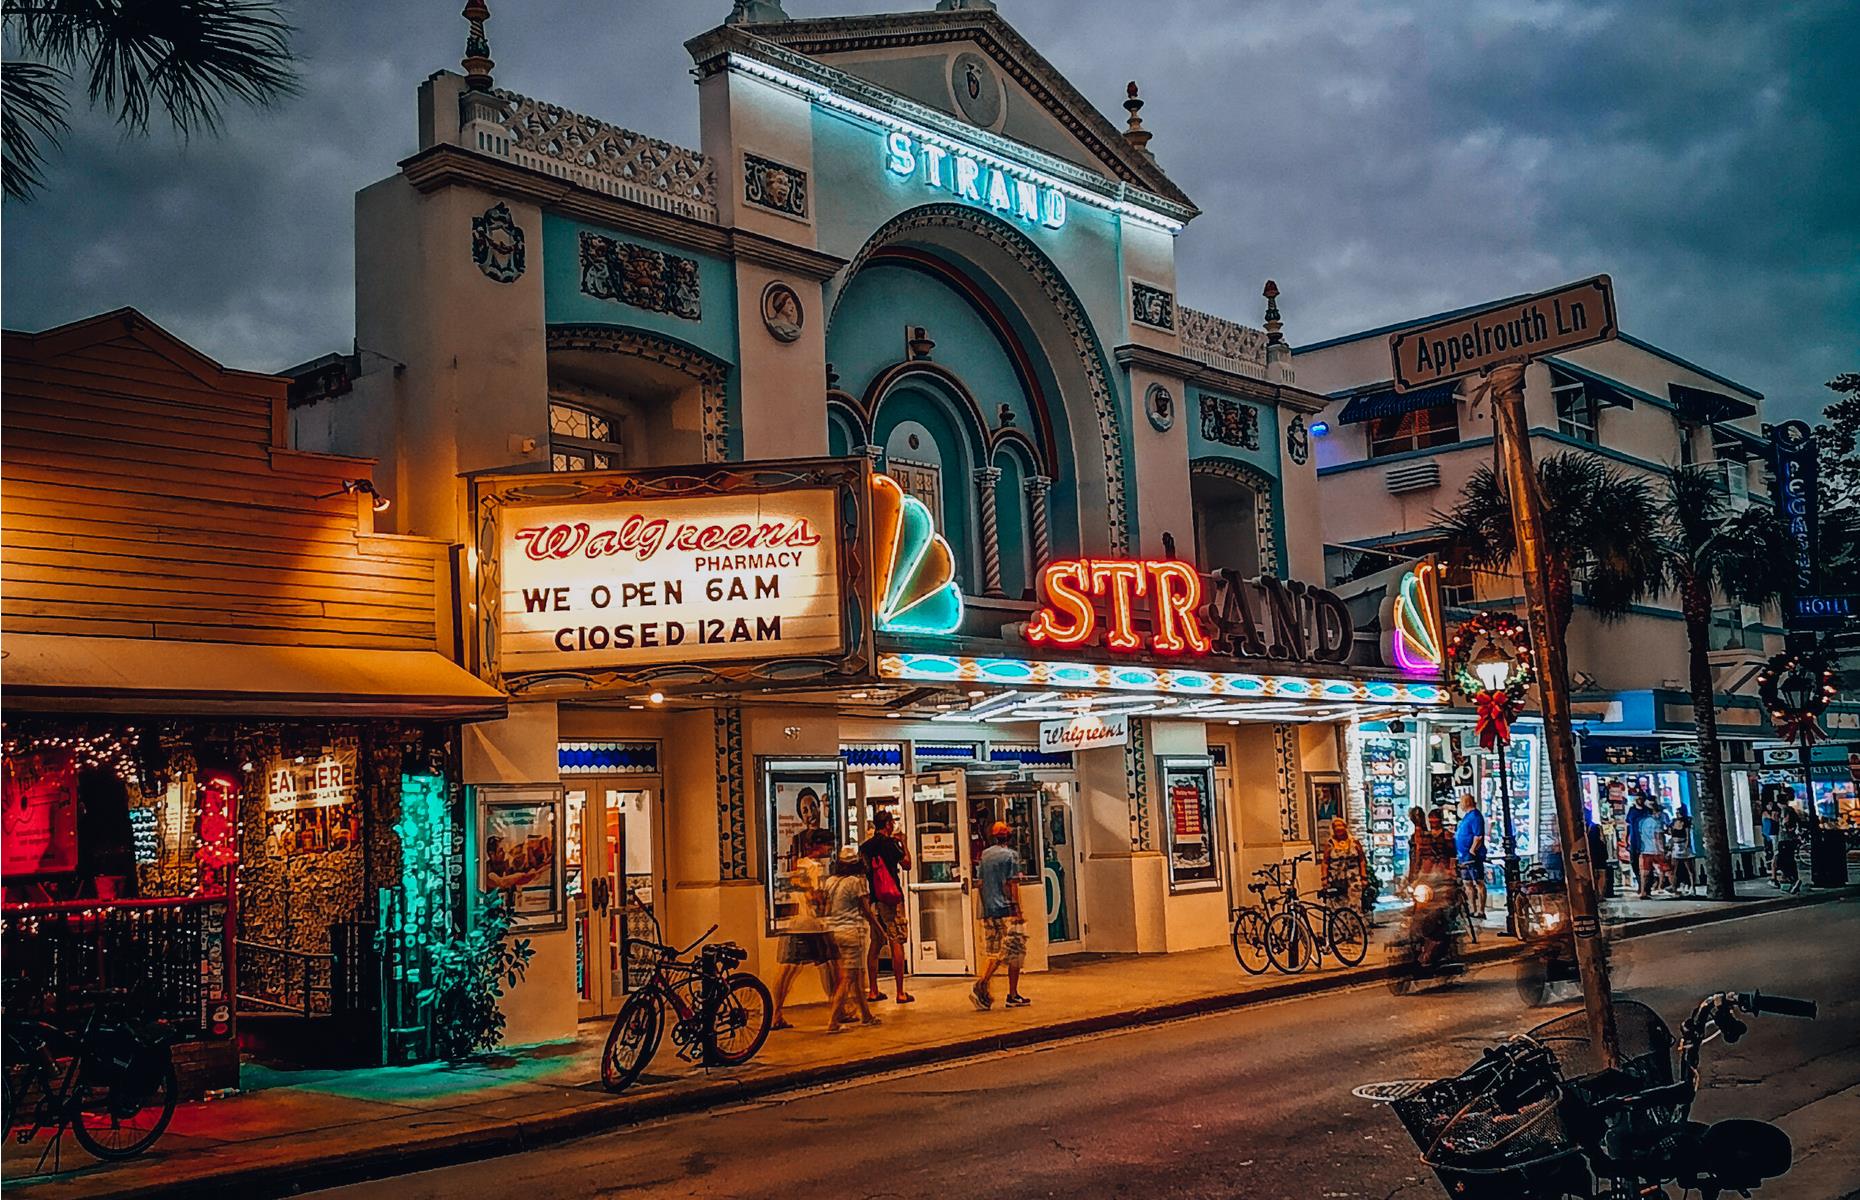 <p>Key West is the nightlife hub of the Florida Keys and most of the action is centered around Duval Street, where open-sided bars like Willie T’s have pillars and ceilings plastered with dollar bills. Try Smallest Bar, which is tinier than a shed and fun for a group selfie.</p>  <p><a href="http://www.loveexploring.com/guides/73827/explore-the-florida-keys-where-to-stay-what-to-eat-the-top-things-to-do"><strong>Read our full guide to the Florida Keys</strong></a></p>